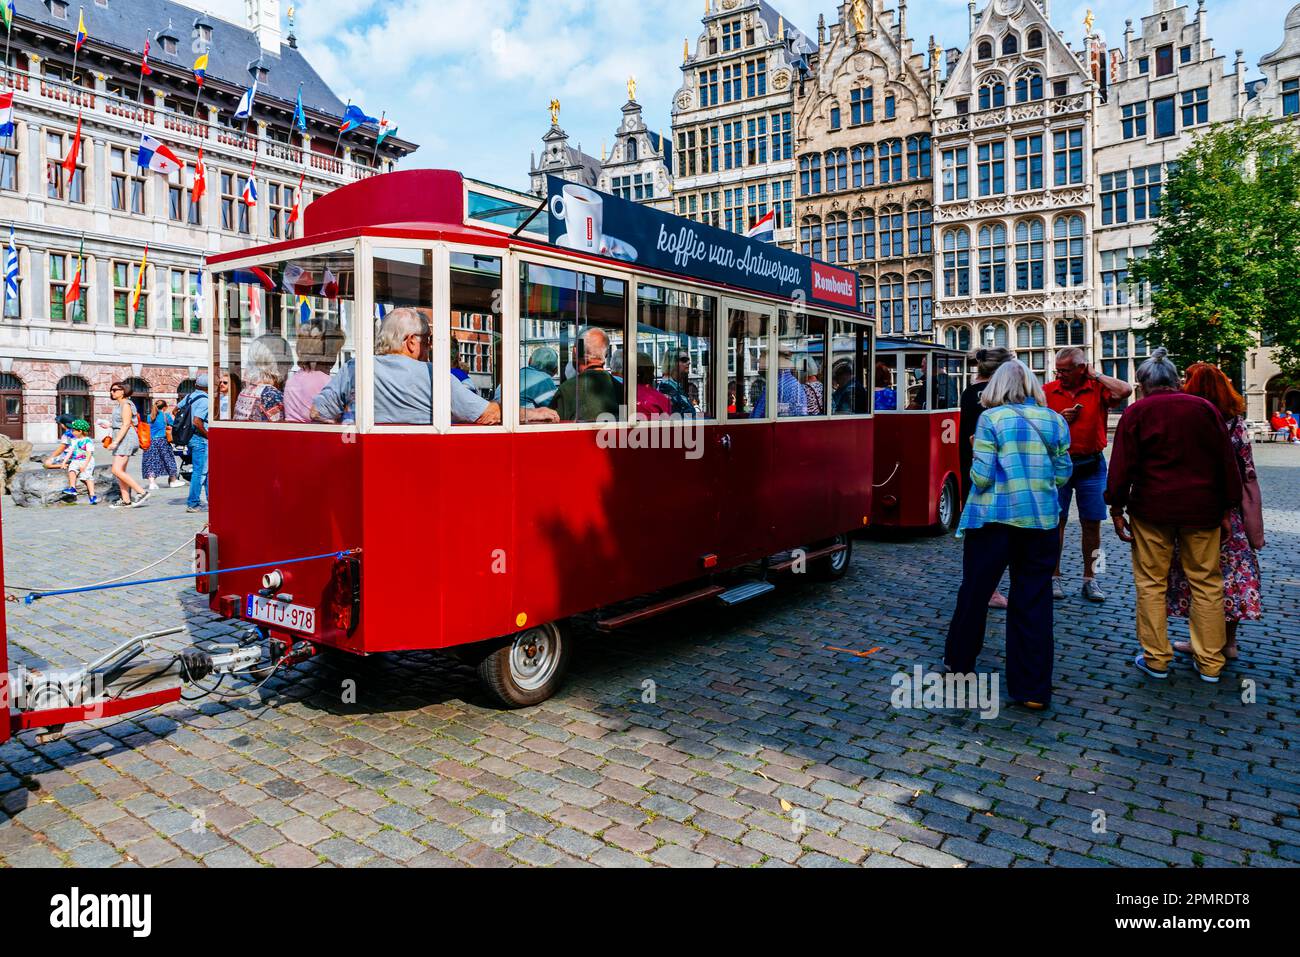 Train for sightseeing tours. The Grote Markt is the central square of Antwerp, Belgium, situated in the old city quarter. Antwerp, Flemish Region, Bel Stock Photo